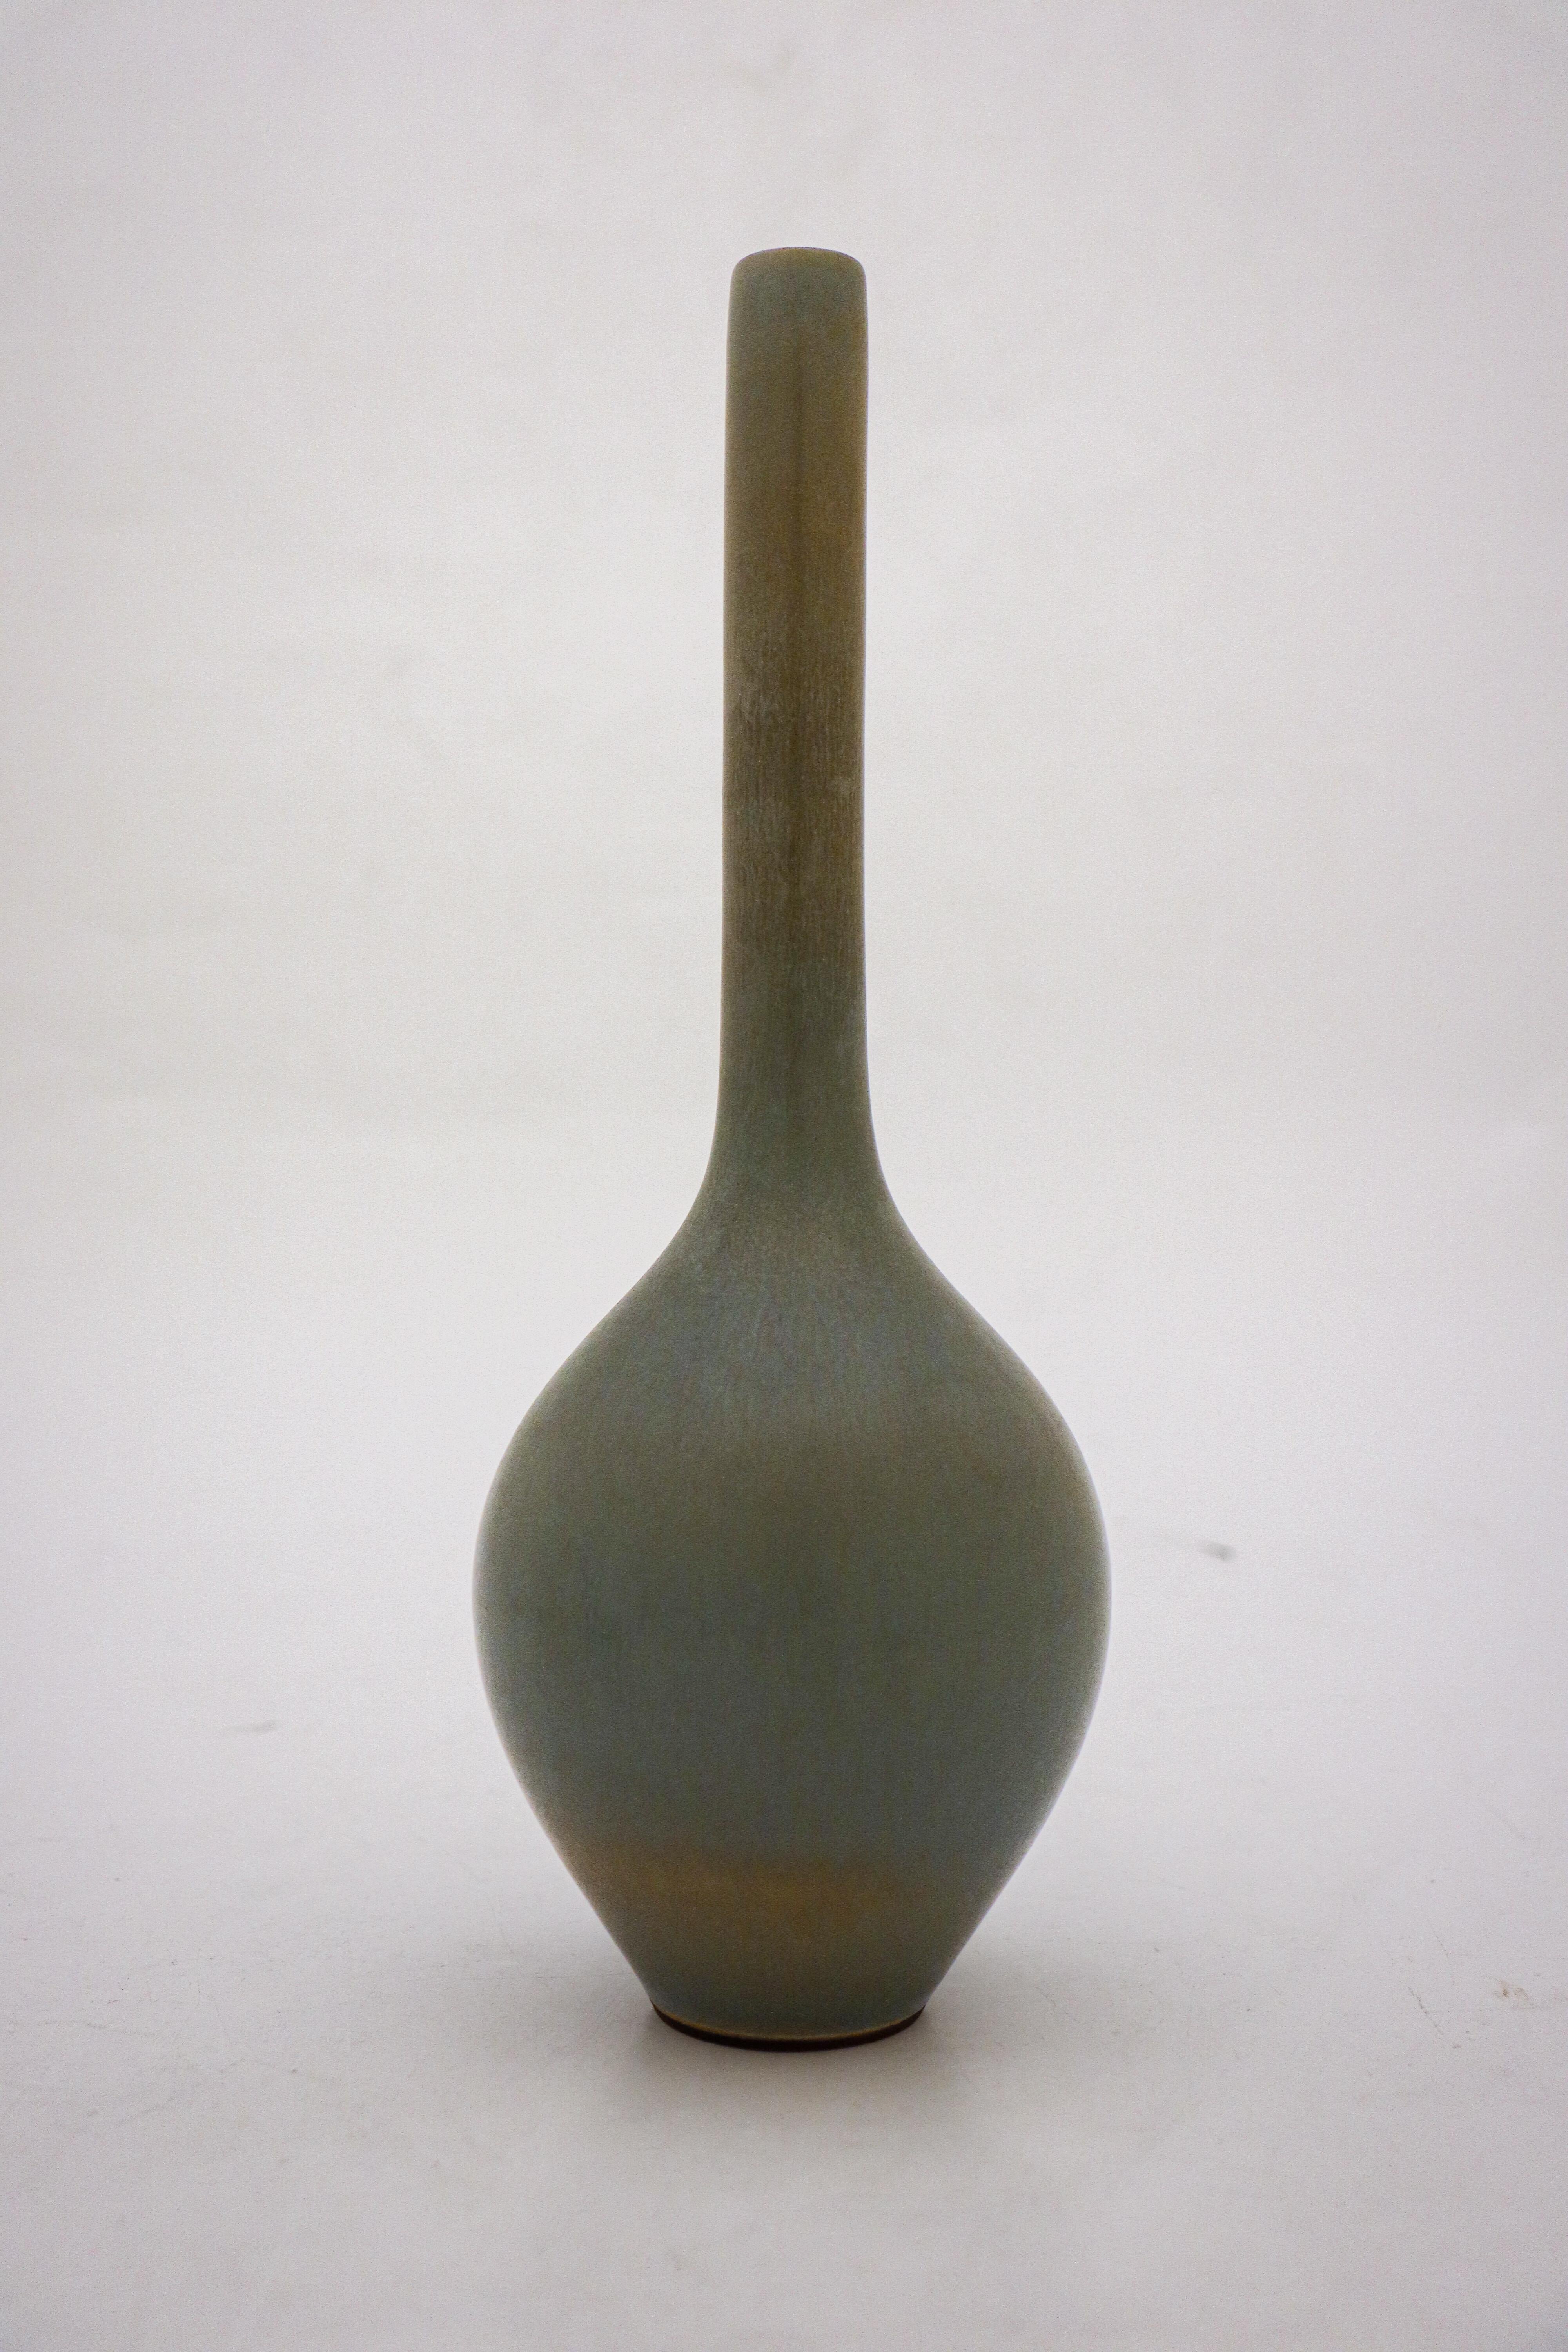 A lovely vase with a gray har fur glaze designed by Berndt Friberg at Gustavsberg in Stockholm, the vase is 25.5 cm high. It's marked as on picture and was made in 1956. It is in excellent condition.